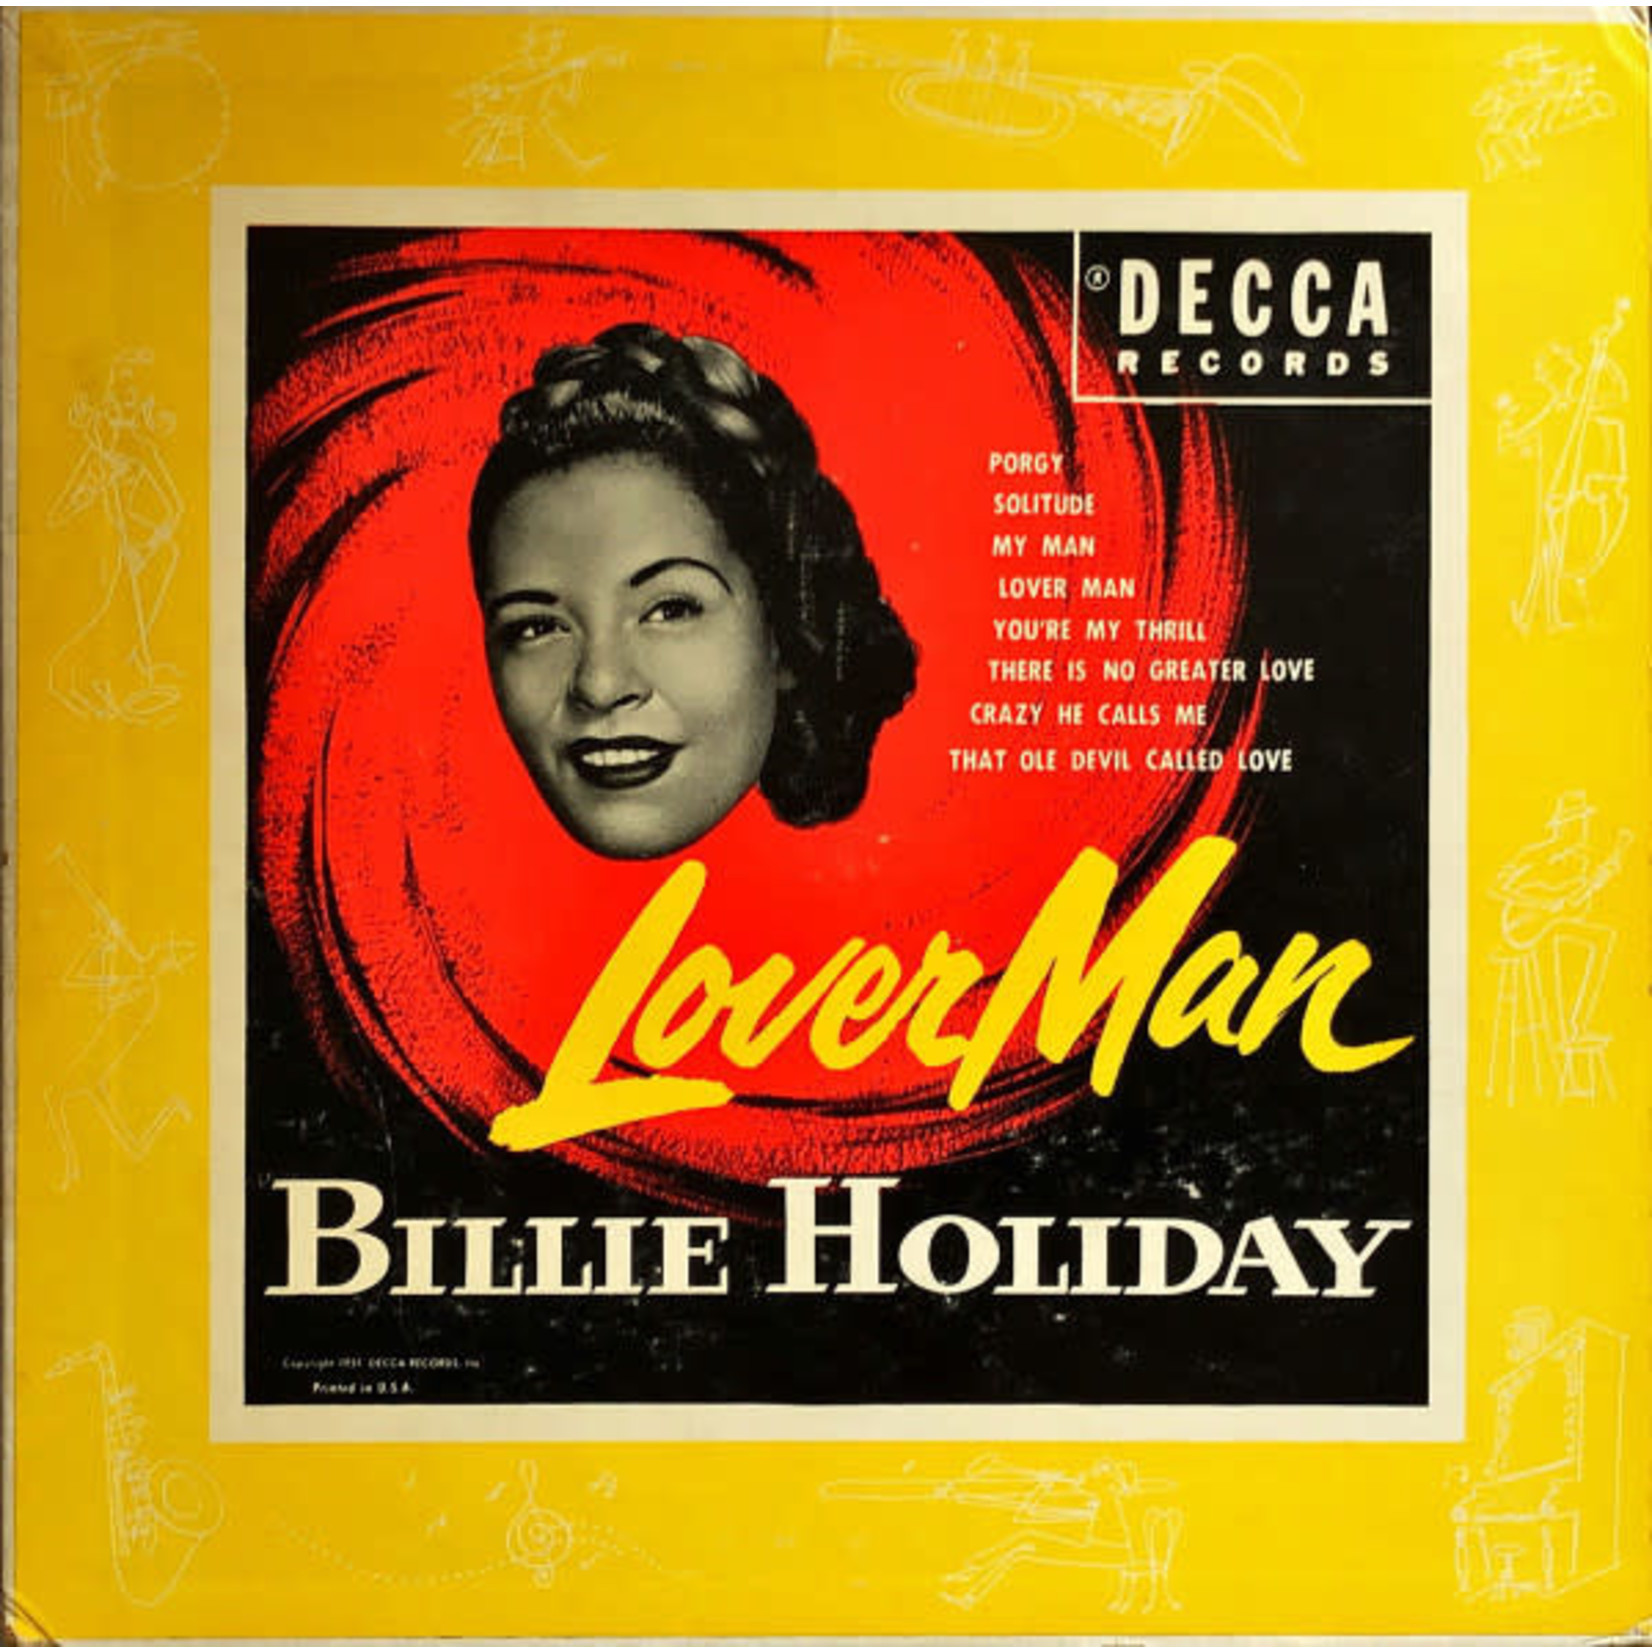 [Kollectibles] Billie Holiday - Lover Man (10", 1951 US, Cover VG/Disc G+)